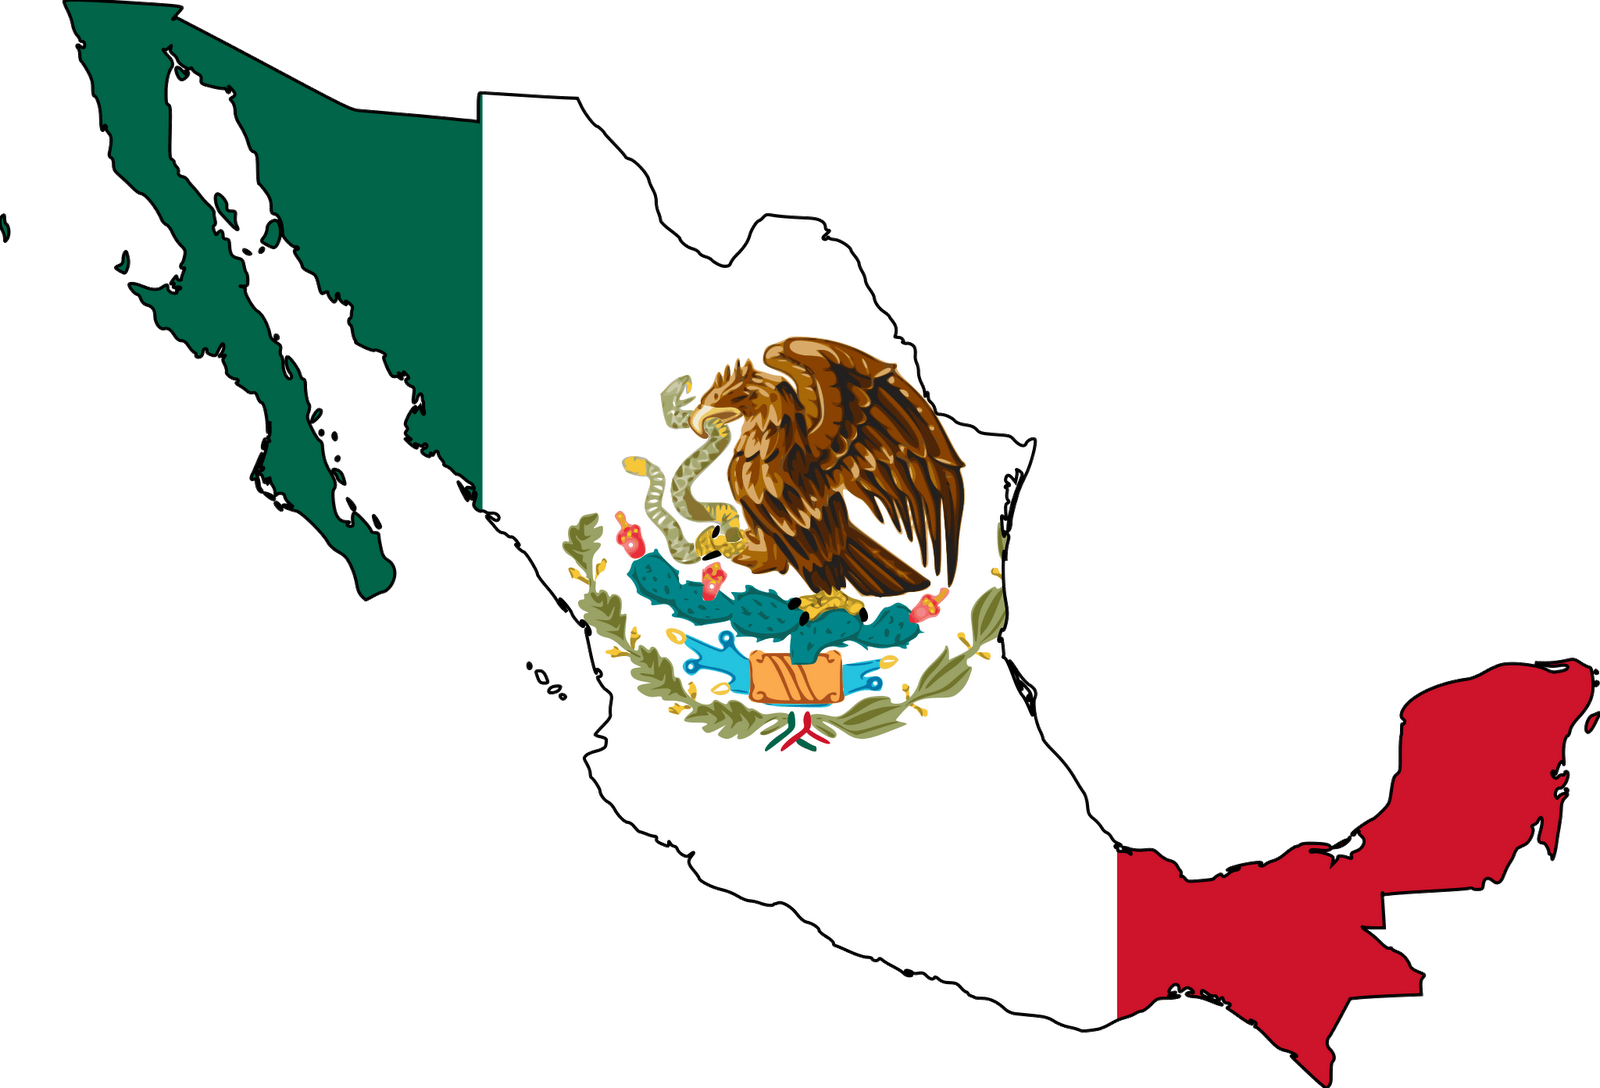 Mexican Flag Clipart - ClipArt Best